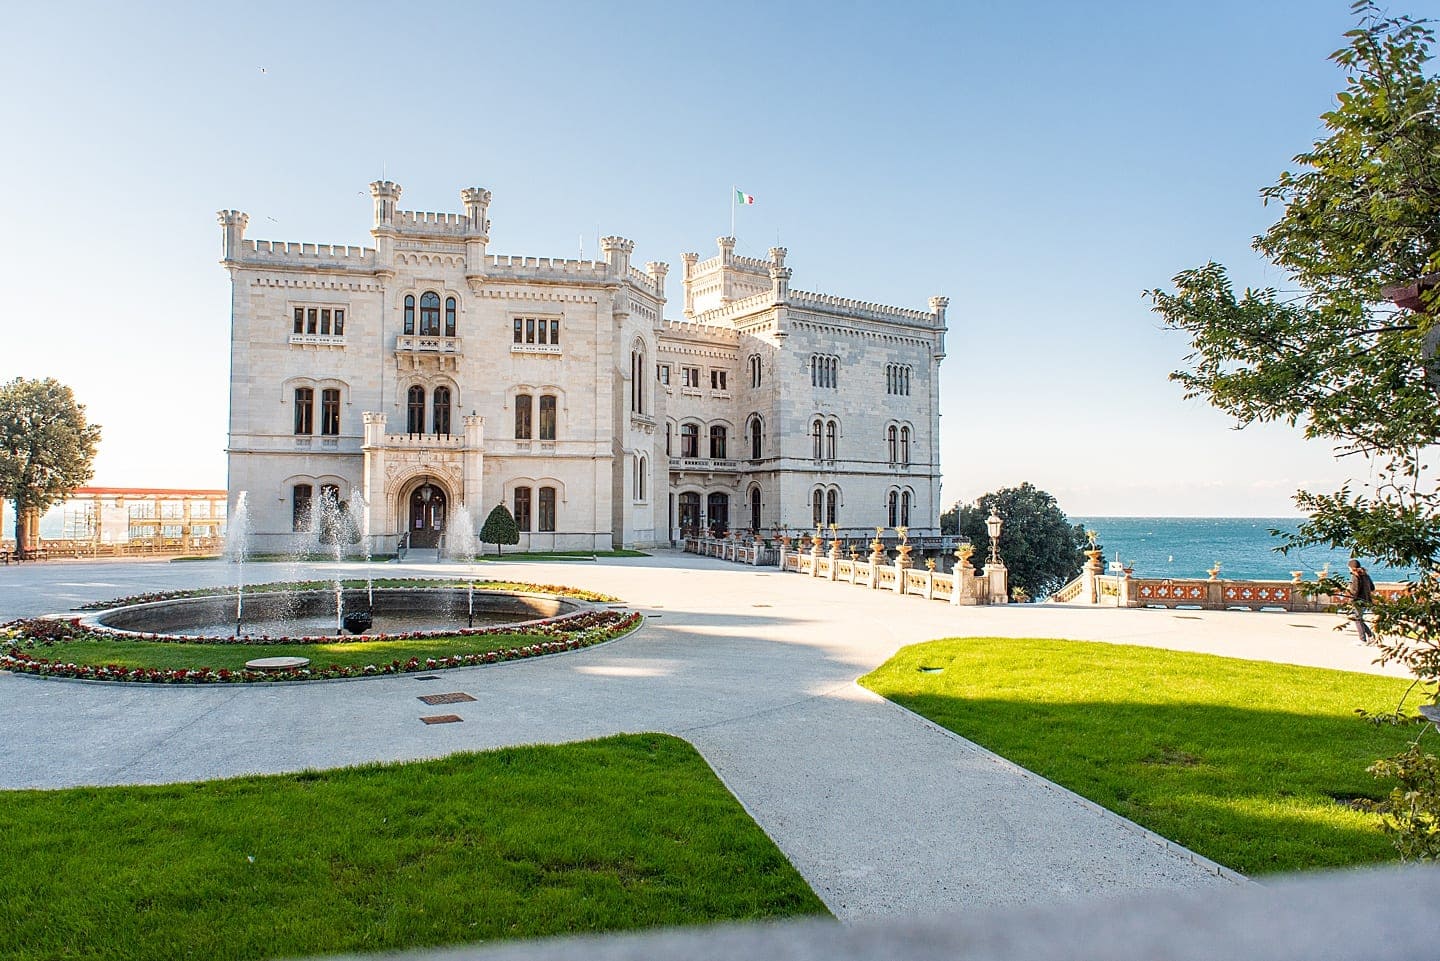 Top Things to Do in Trieste, Italy if You Only Have One Day